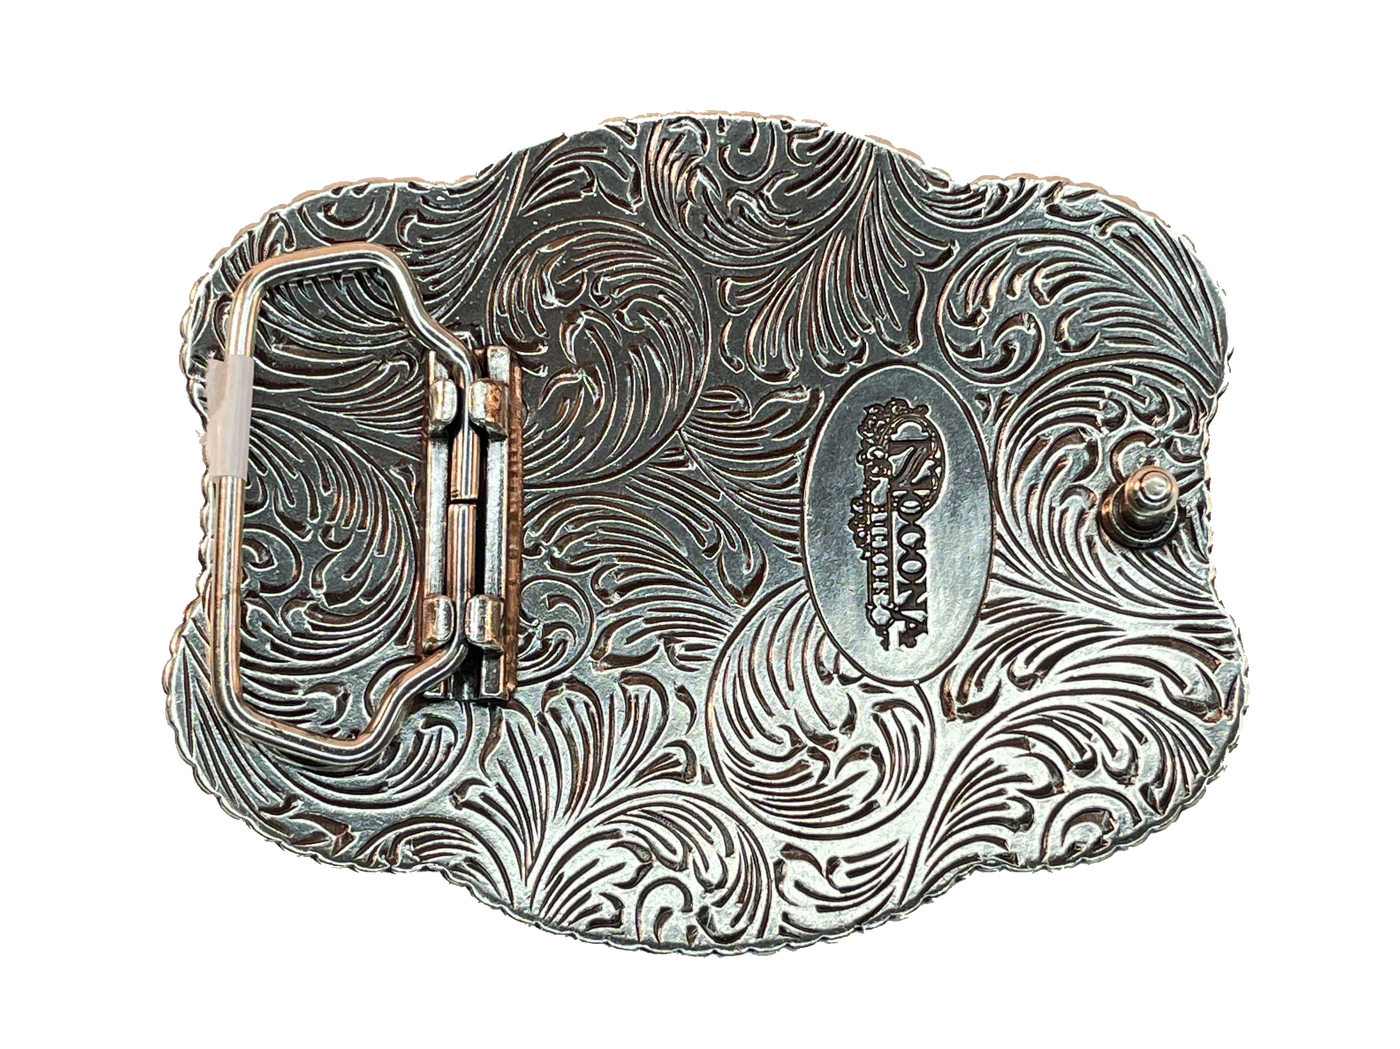 Nocona Indian Chief Skull belt buckle Rectangle shaped buckle with a stylish smooth edge. It features a centered Indian chief skull with headdress and feather motif surrounded by western scroll engraving. Copper and brass colors throughout. Measures 3-1/2" wide x 2-1/2" tall Fits belts up to 1 1/2" wide Available online or in our shop in Smyrna, TN just outside Nashville Add an authentic western look to your favorite belt.